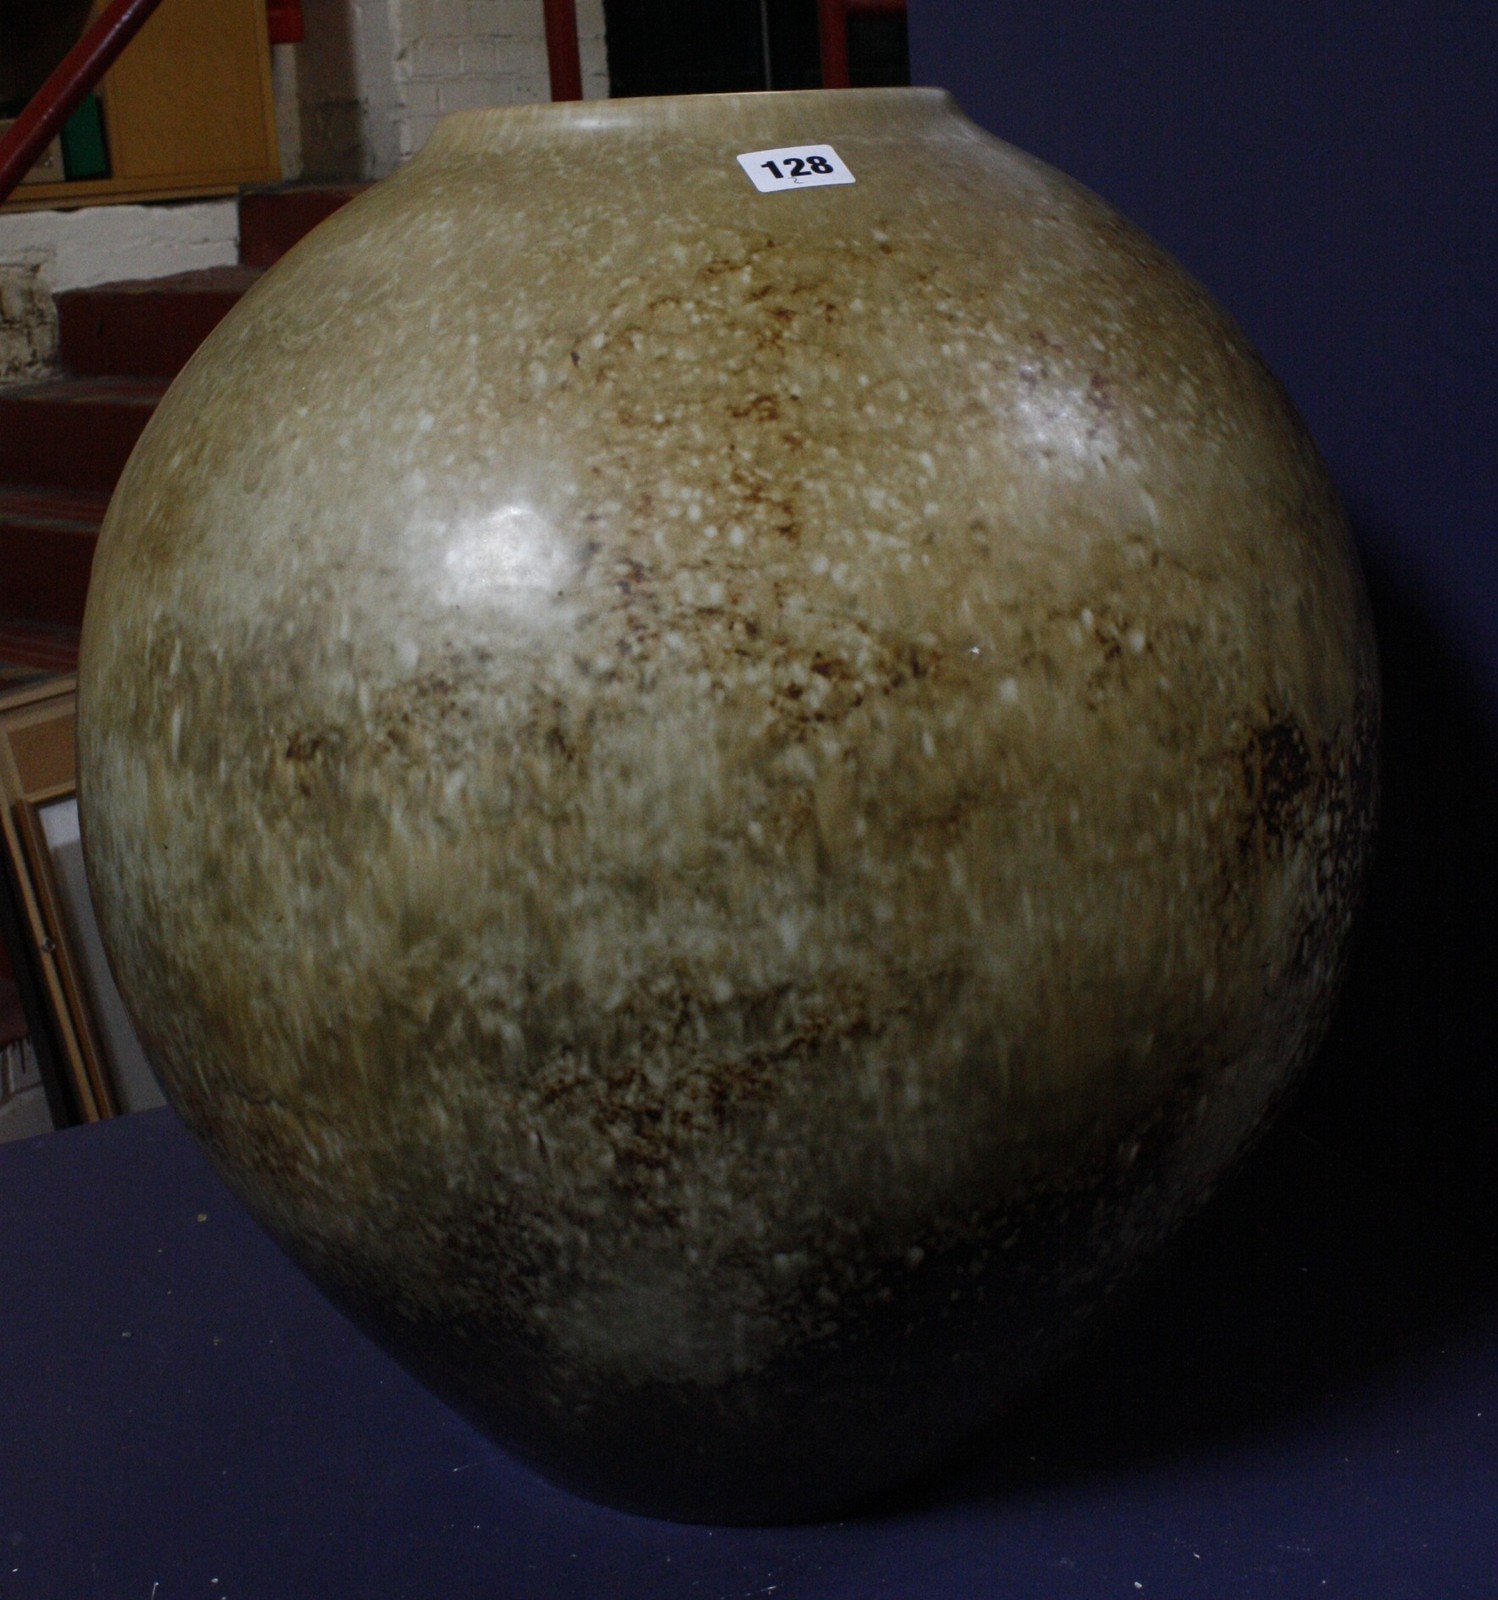 A large Bing & Grondal stoneware ovoid vase, 48cm high, impressed mark on base with painted C956 and